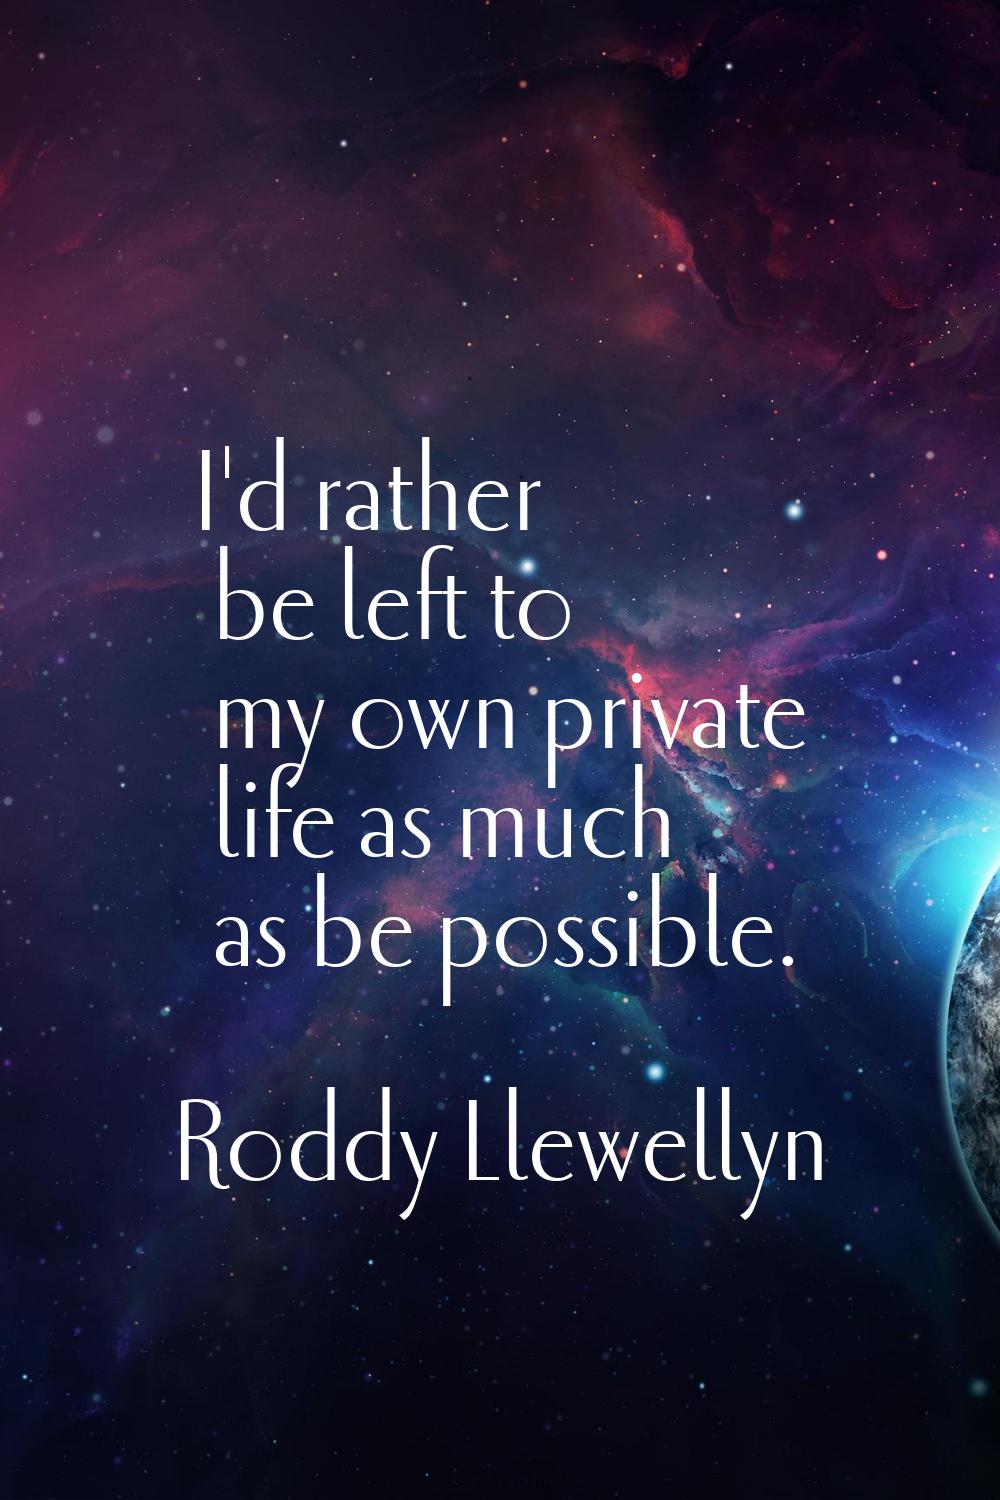 I'd rather be left to my own private life as much as be possible.